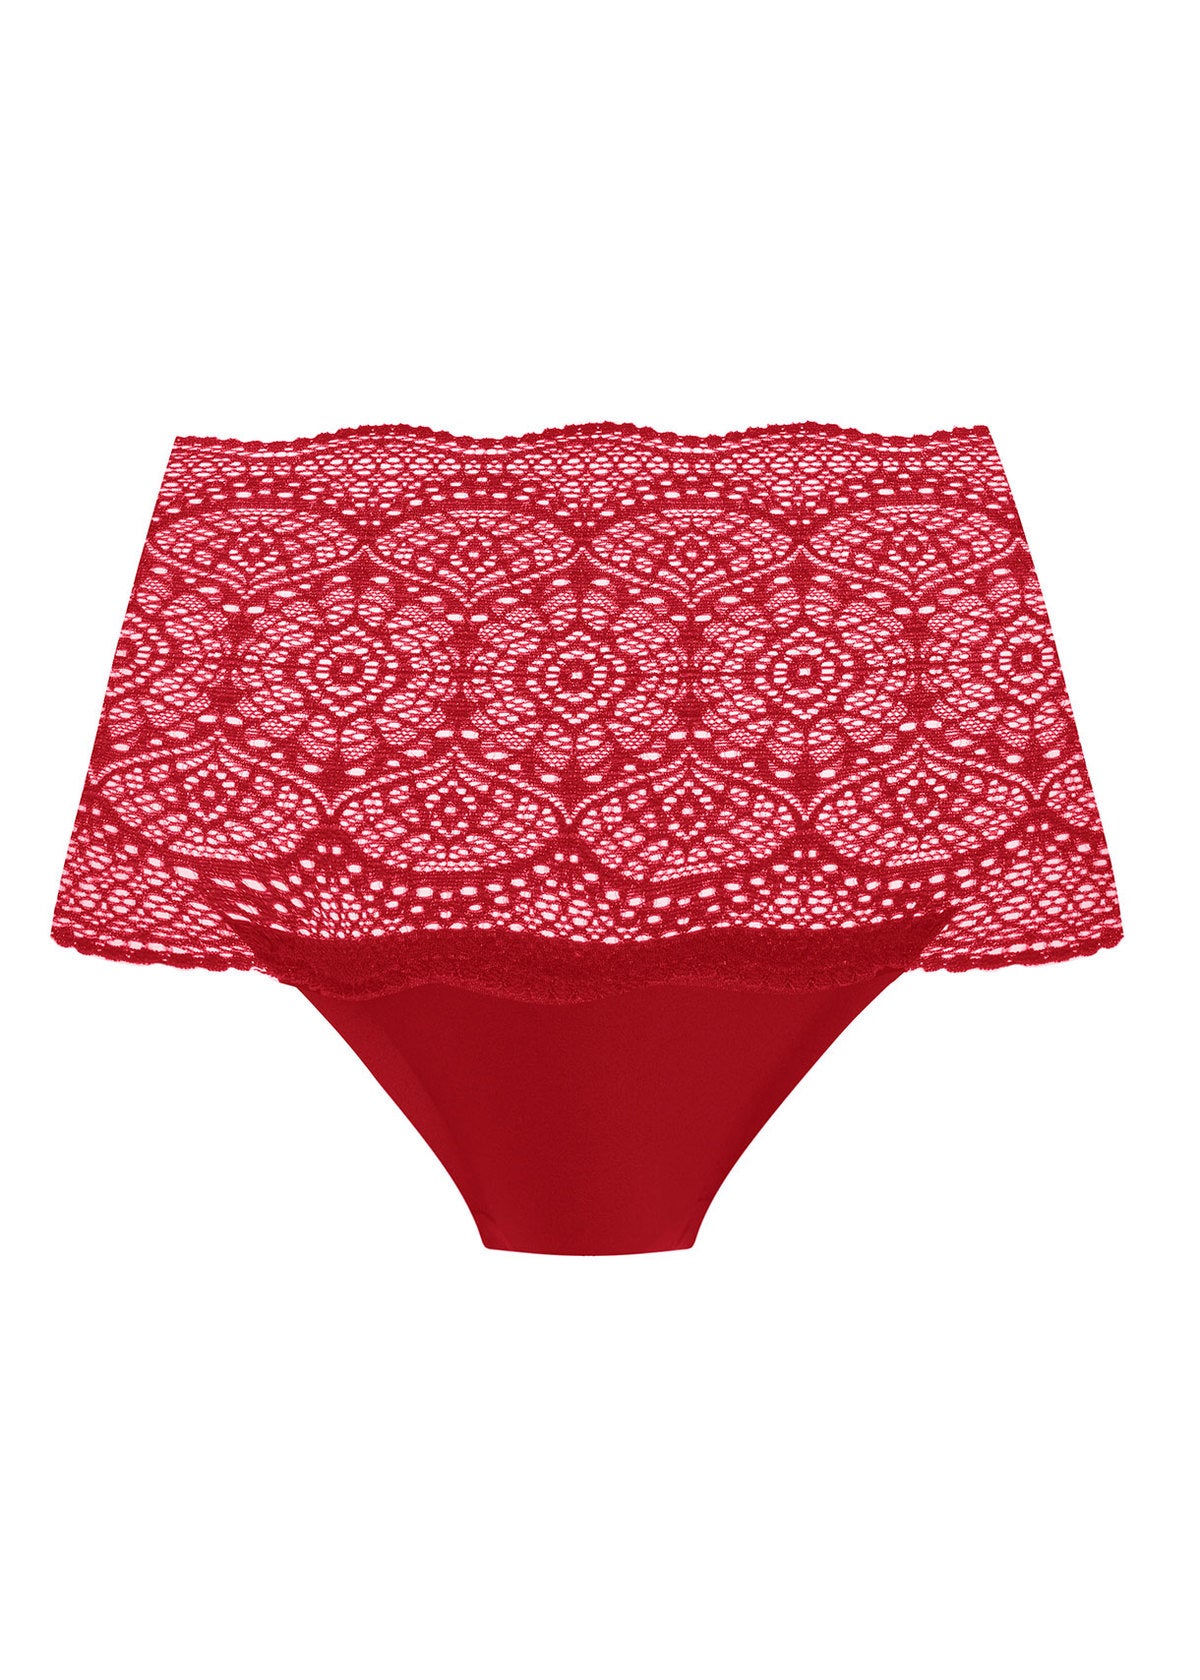 Fantasie Lace Ease Smooth Stretch Lace Red Briefs